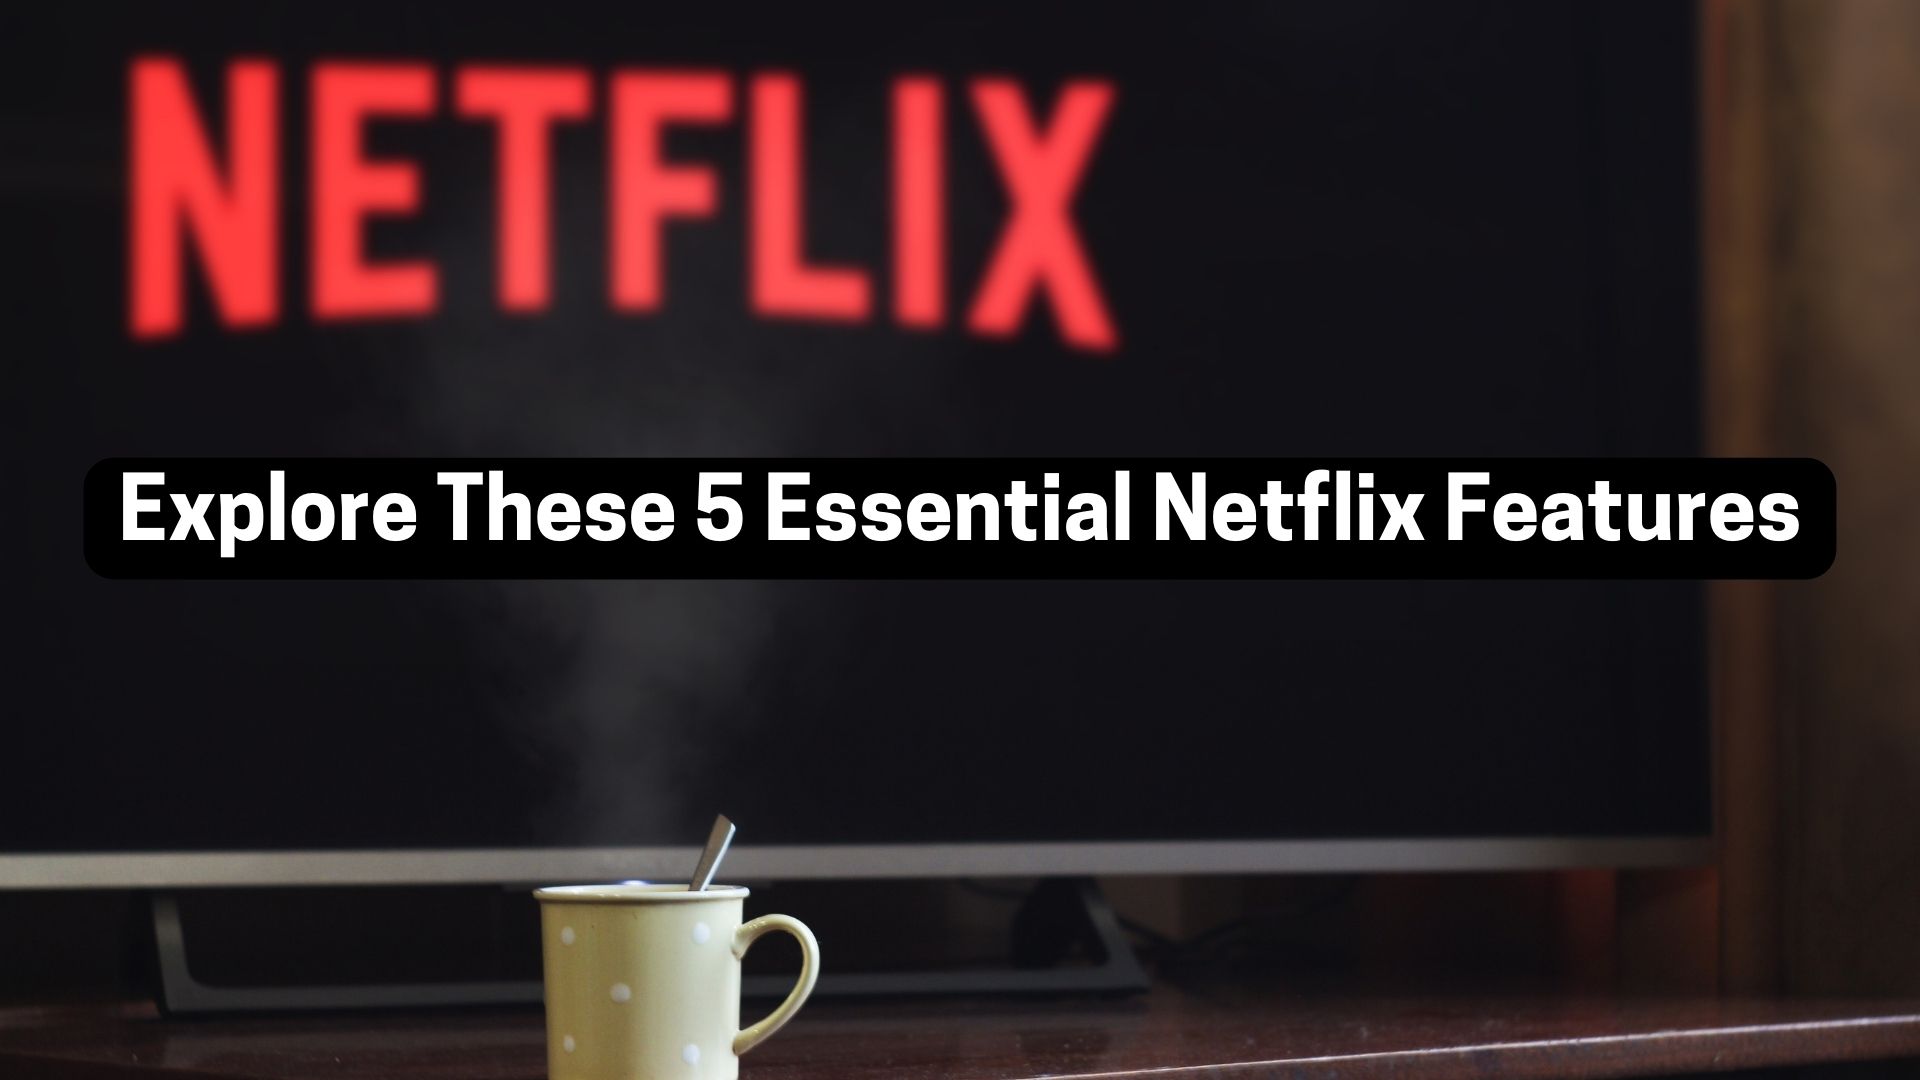 Explore These 5 Essential Netflix Features